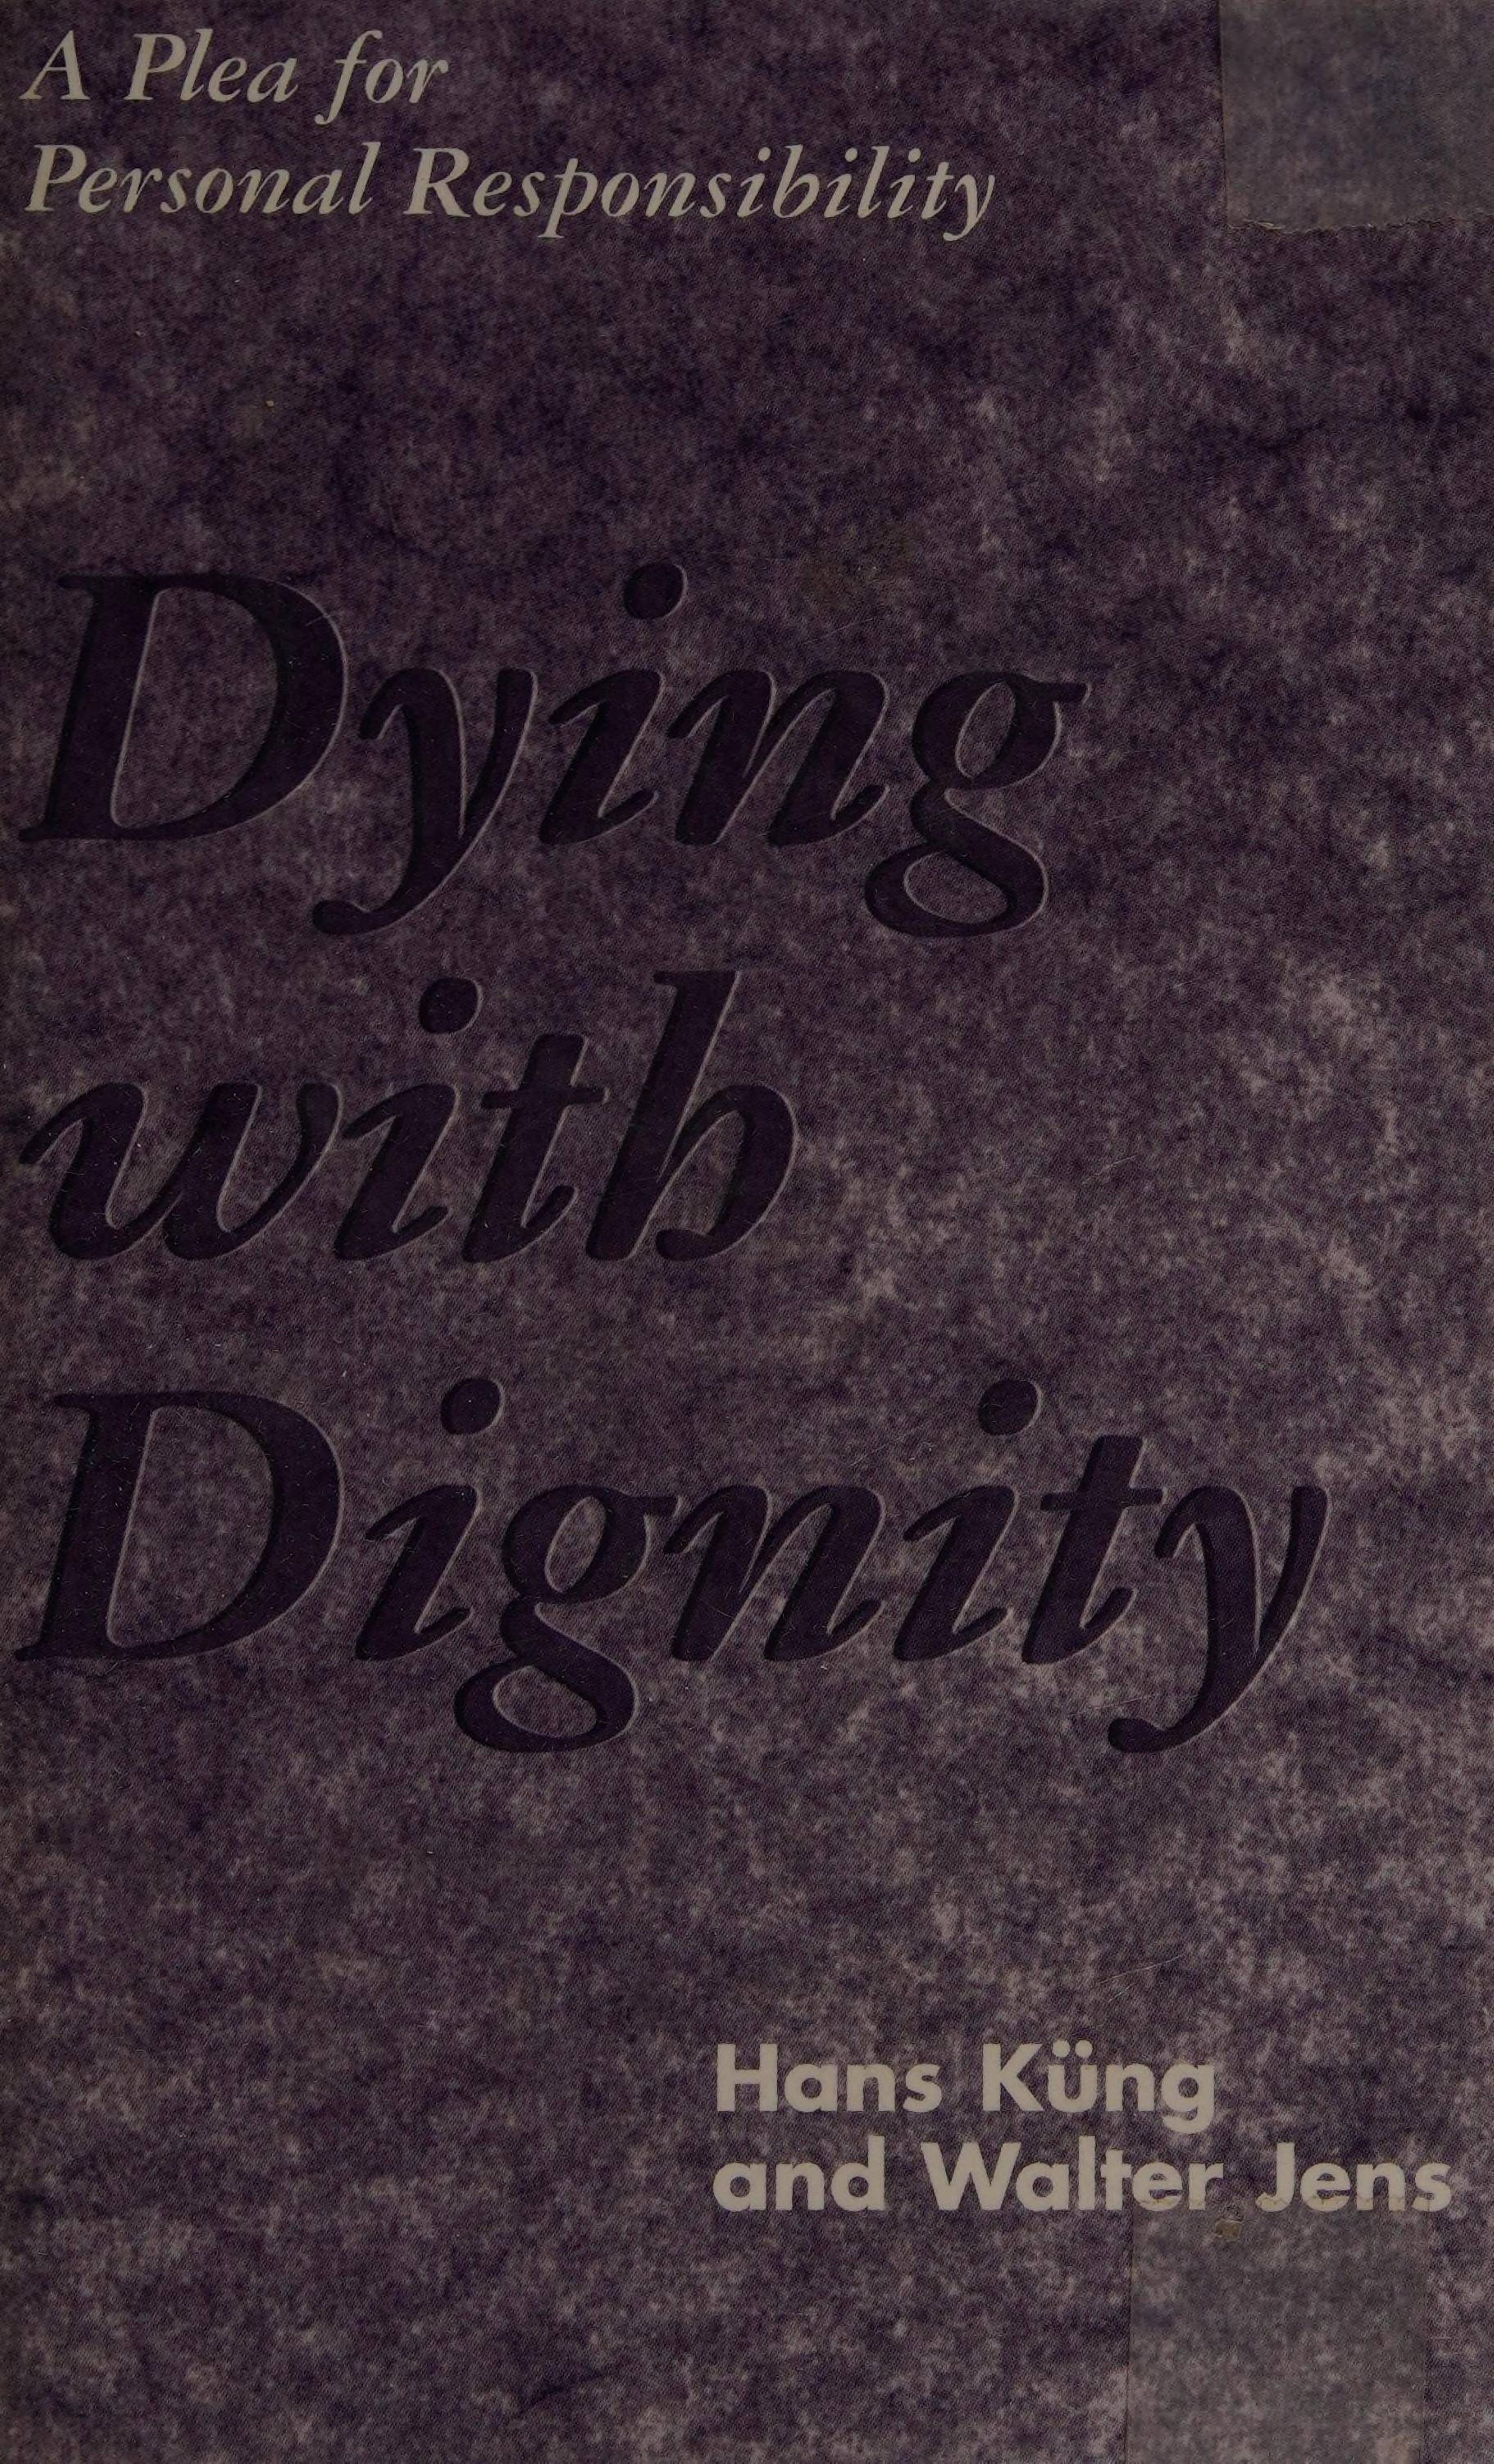 Dying With Dignity: A Plea for Personal Responsibility by Hans Kung Walter Jens Dietrich Niethammer Albin Eser